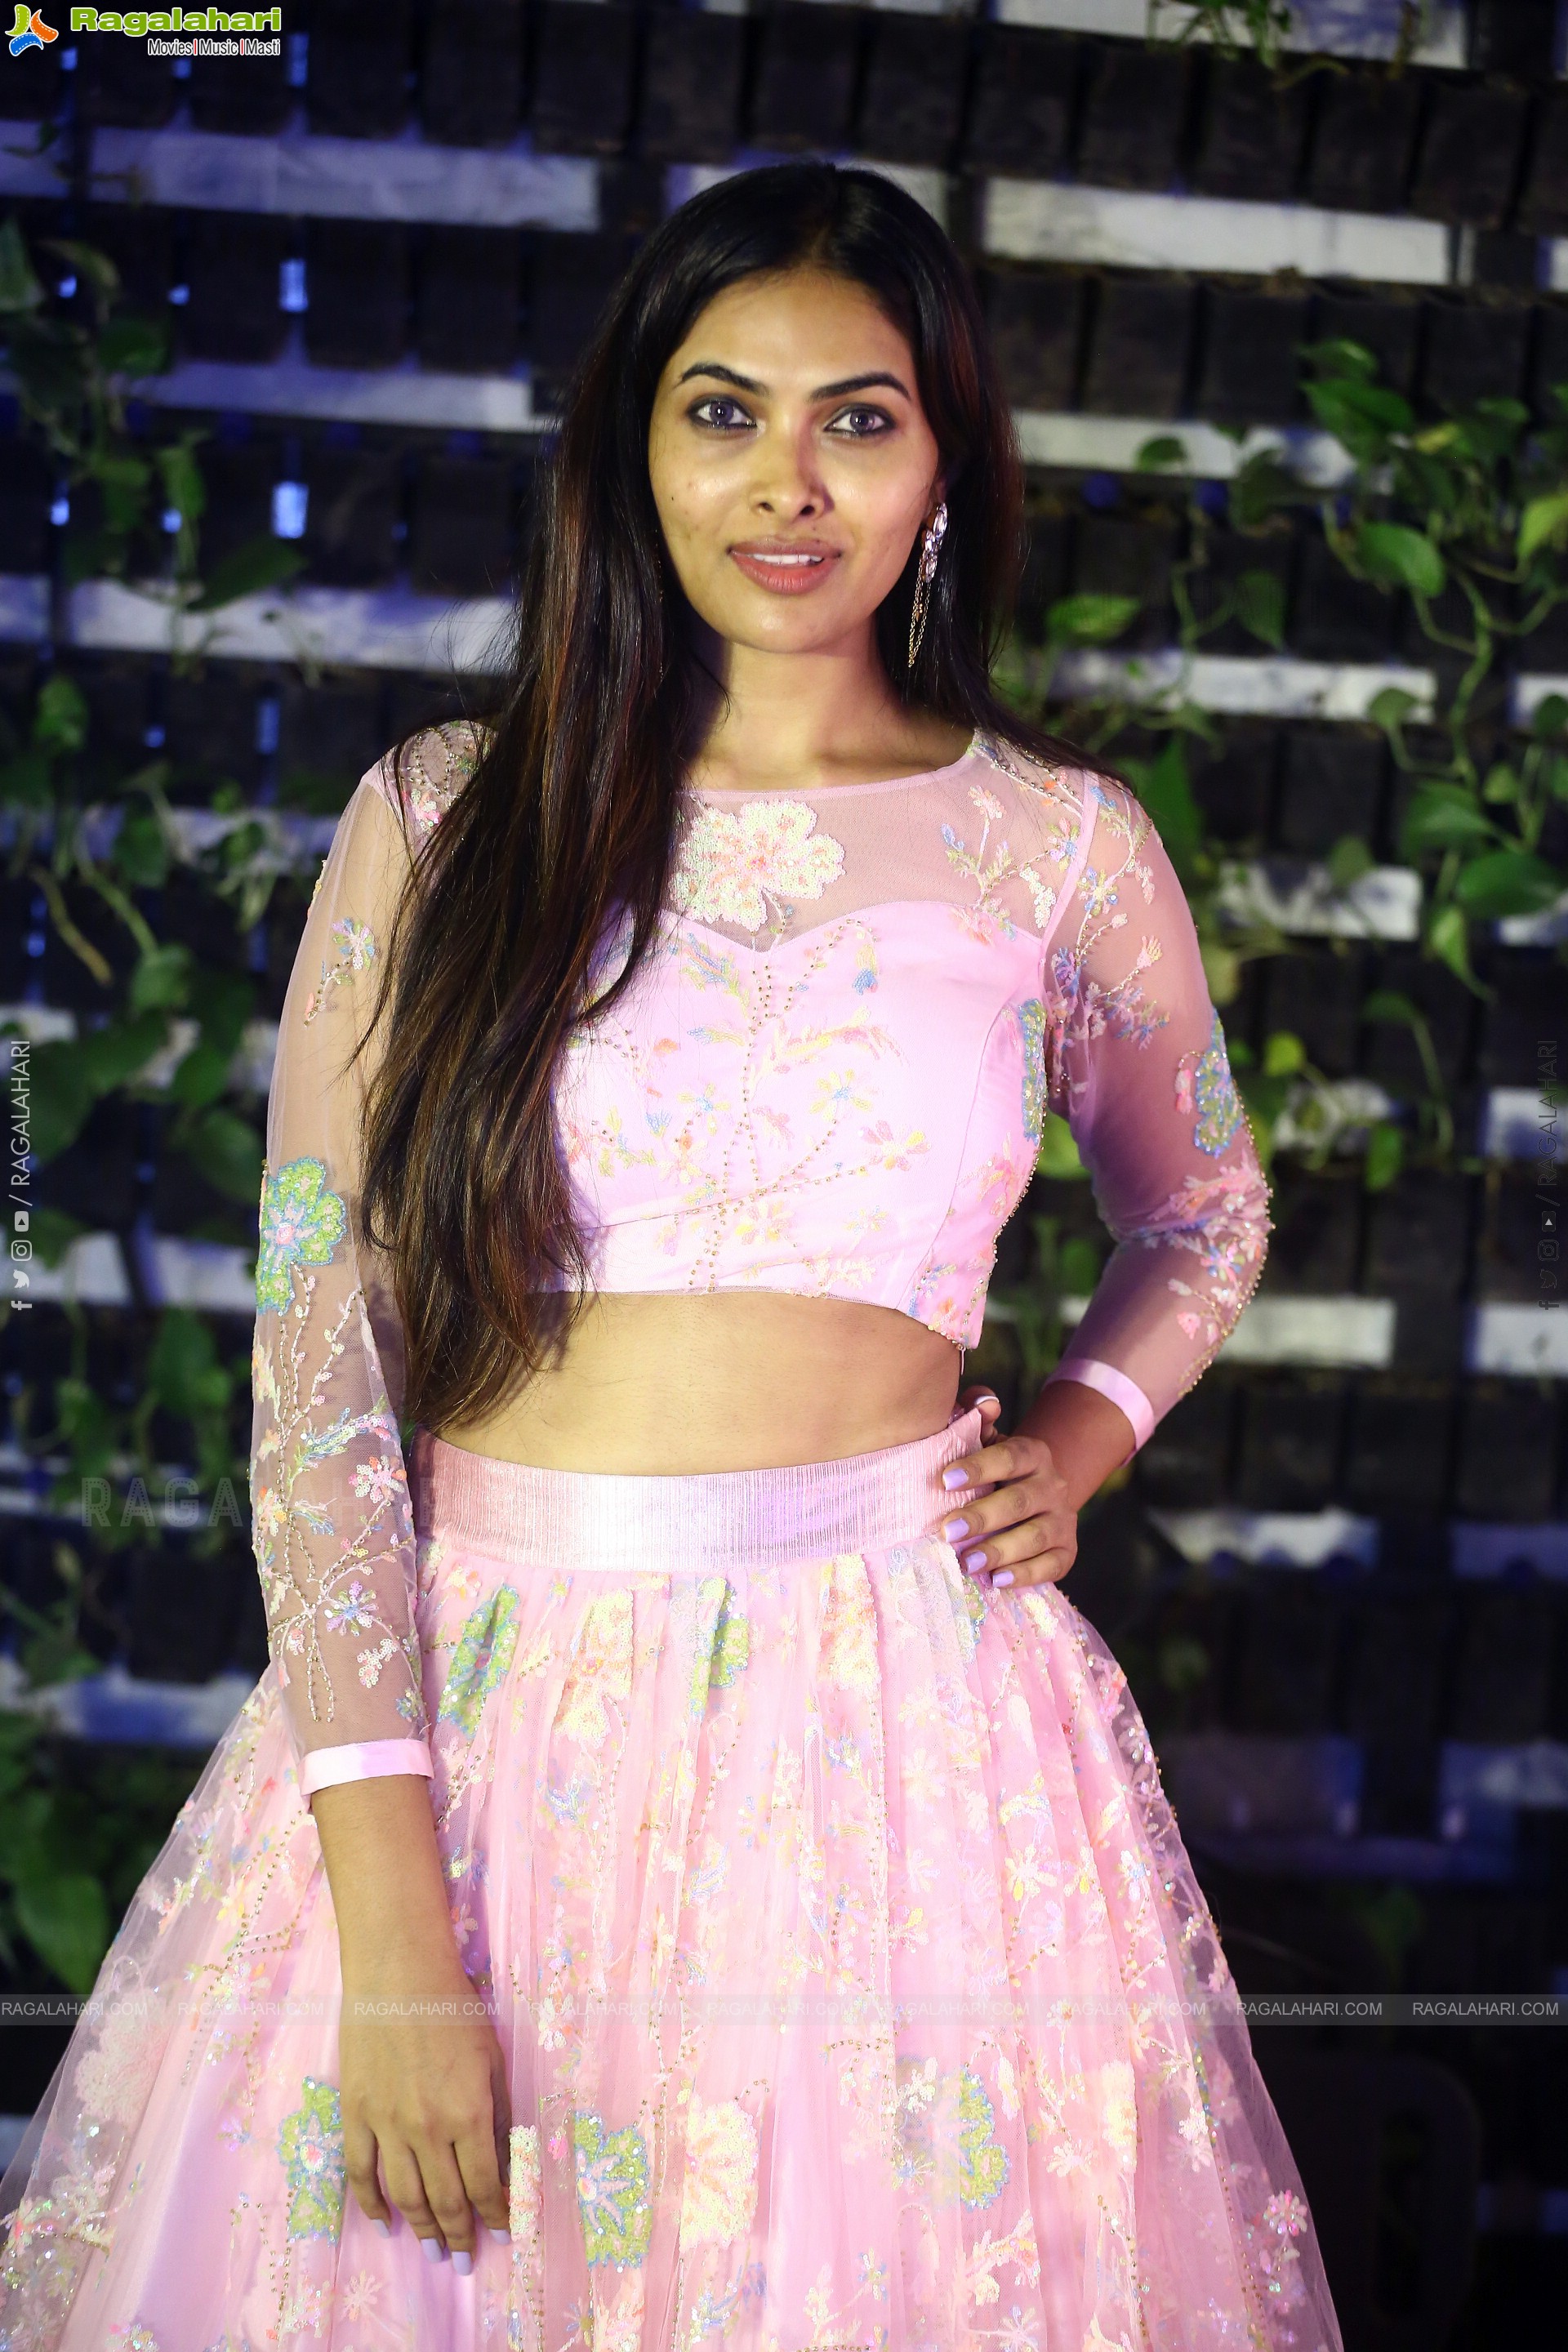 Divi Vadthya at Maa Neella Tank Pre-Release Event, HD Photo Gallery